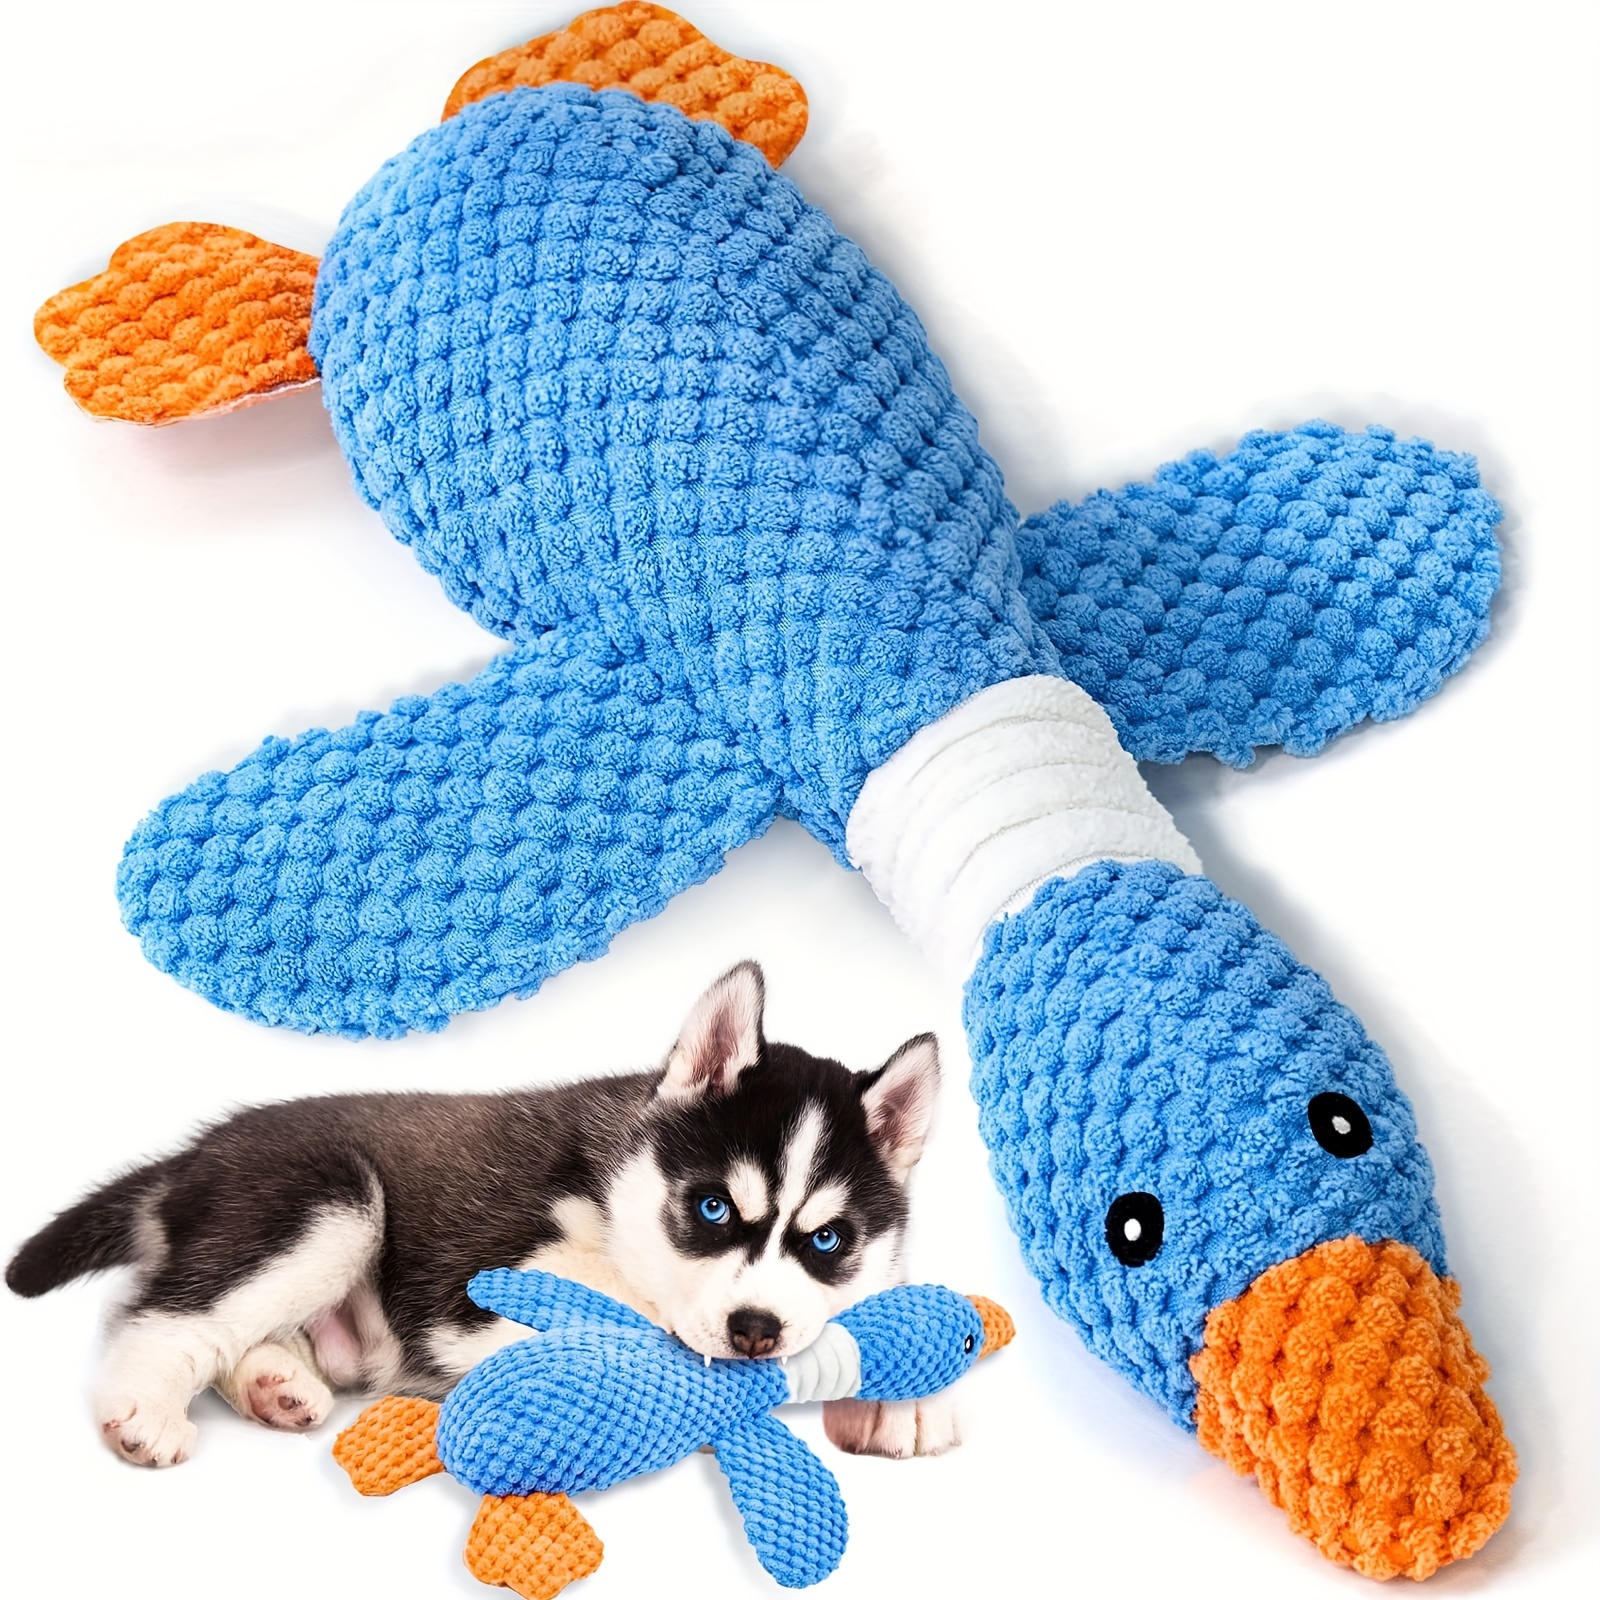 

Durable Plush Goose-shaped Dog Toy For Teething And Play - Soft, Chew-resistant Fabric For Medium Breeds - Ideal For Dental Health And Interactive Fun - Assorted Colors